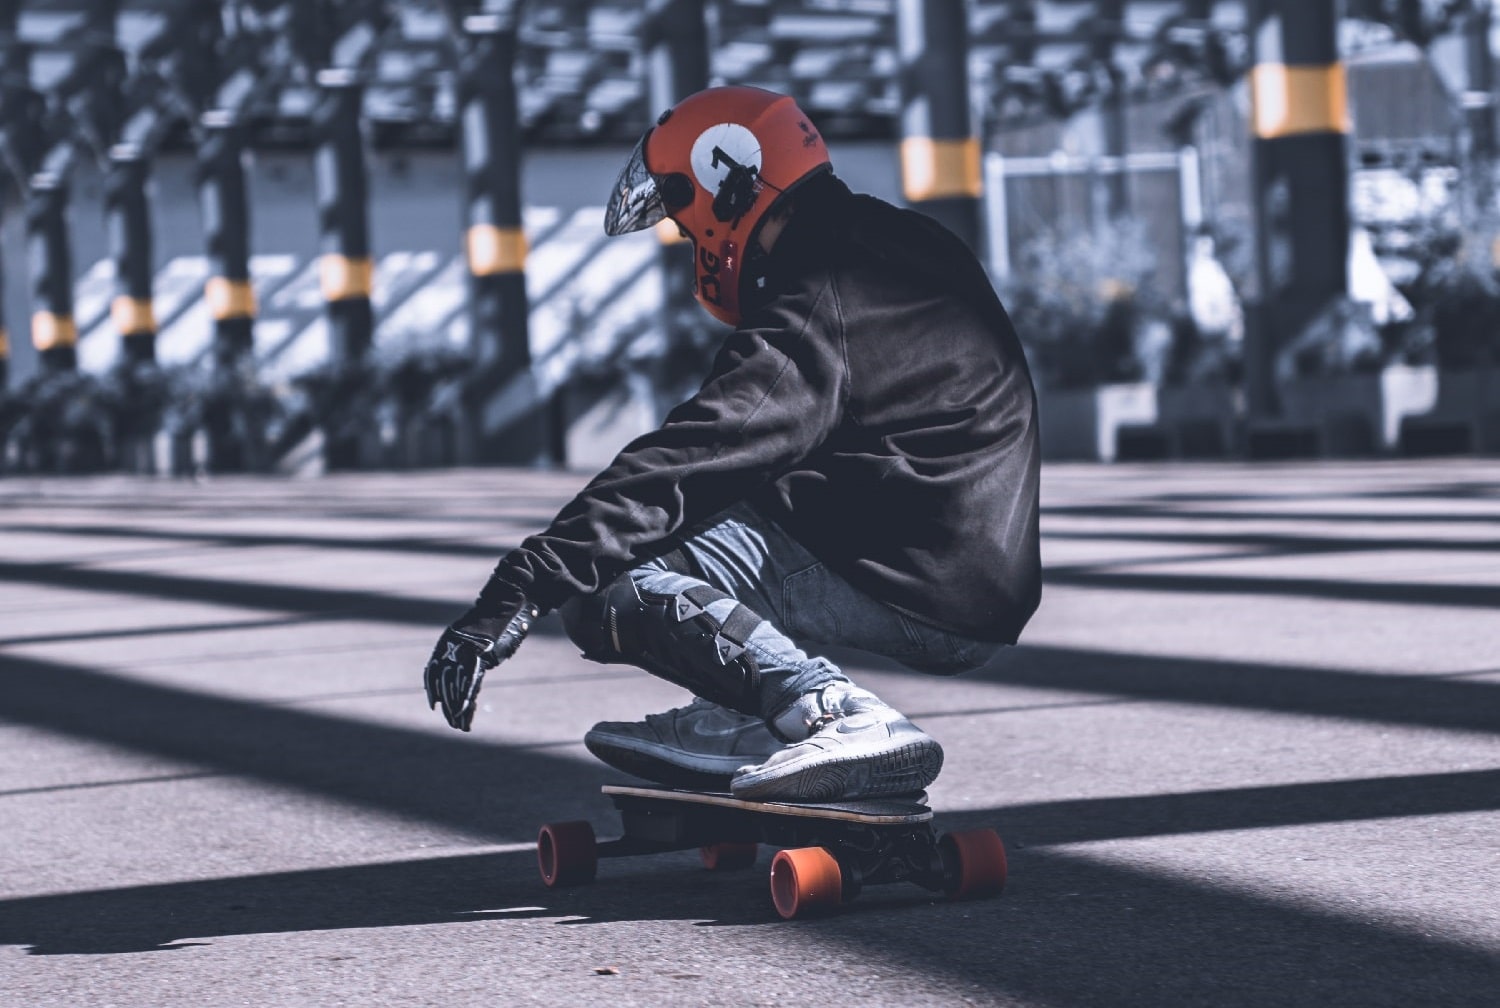 Fast Electric Skateboards